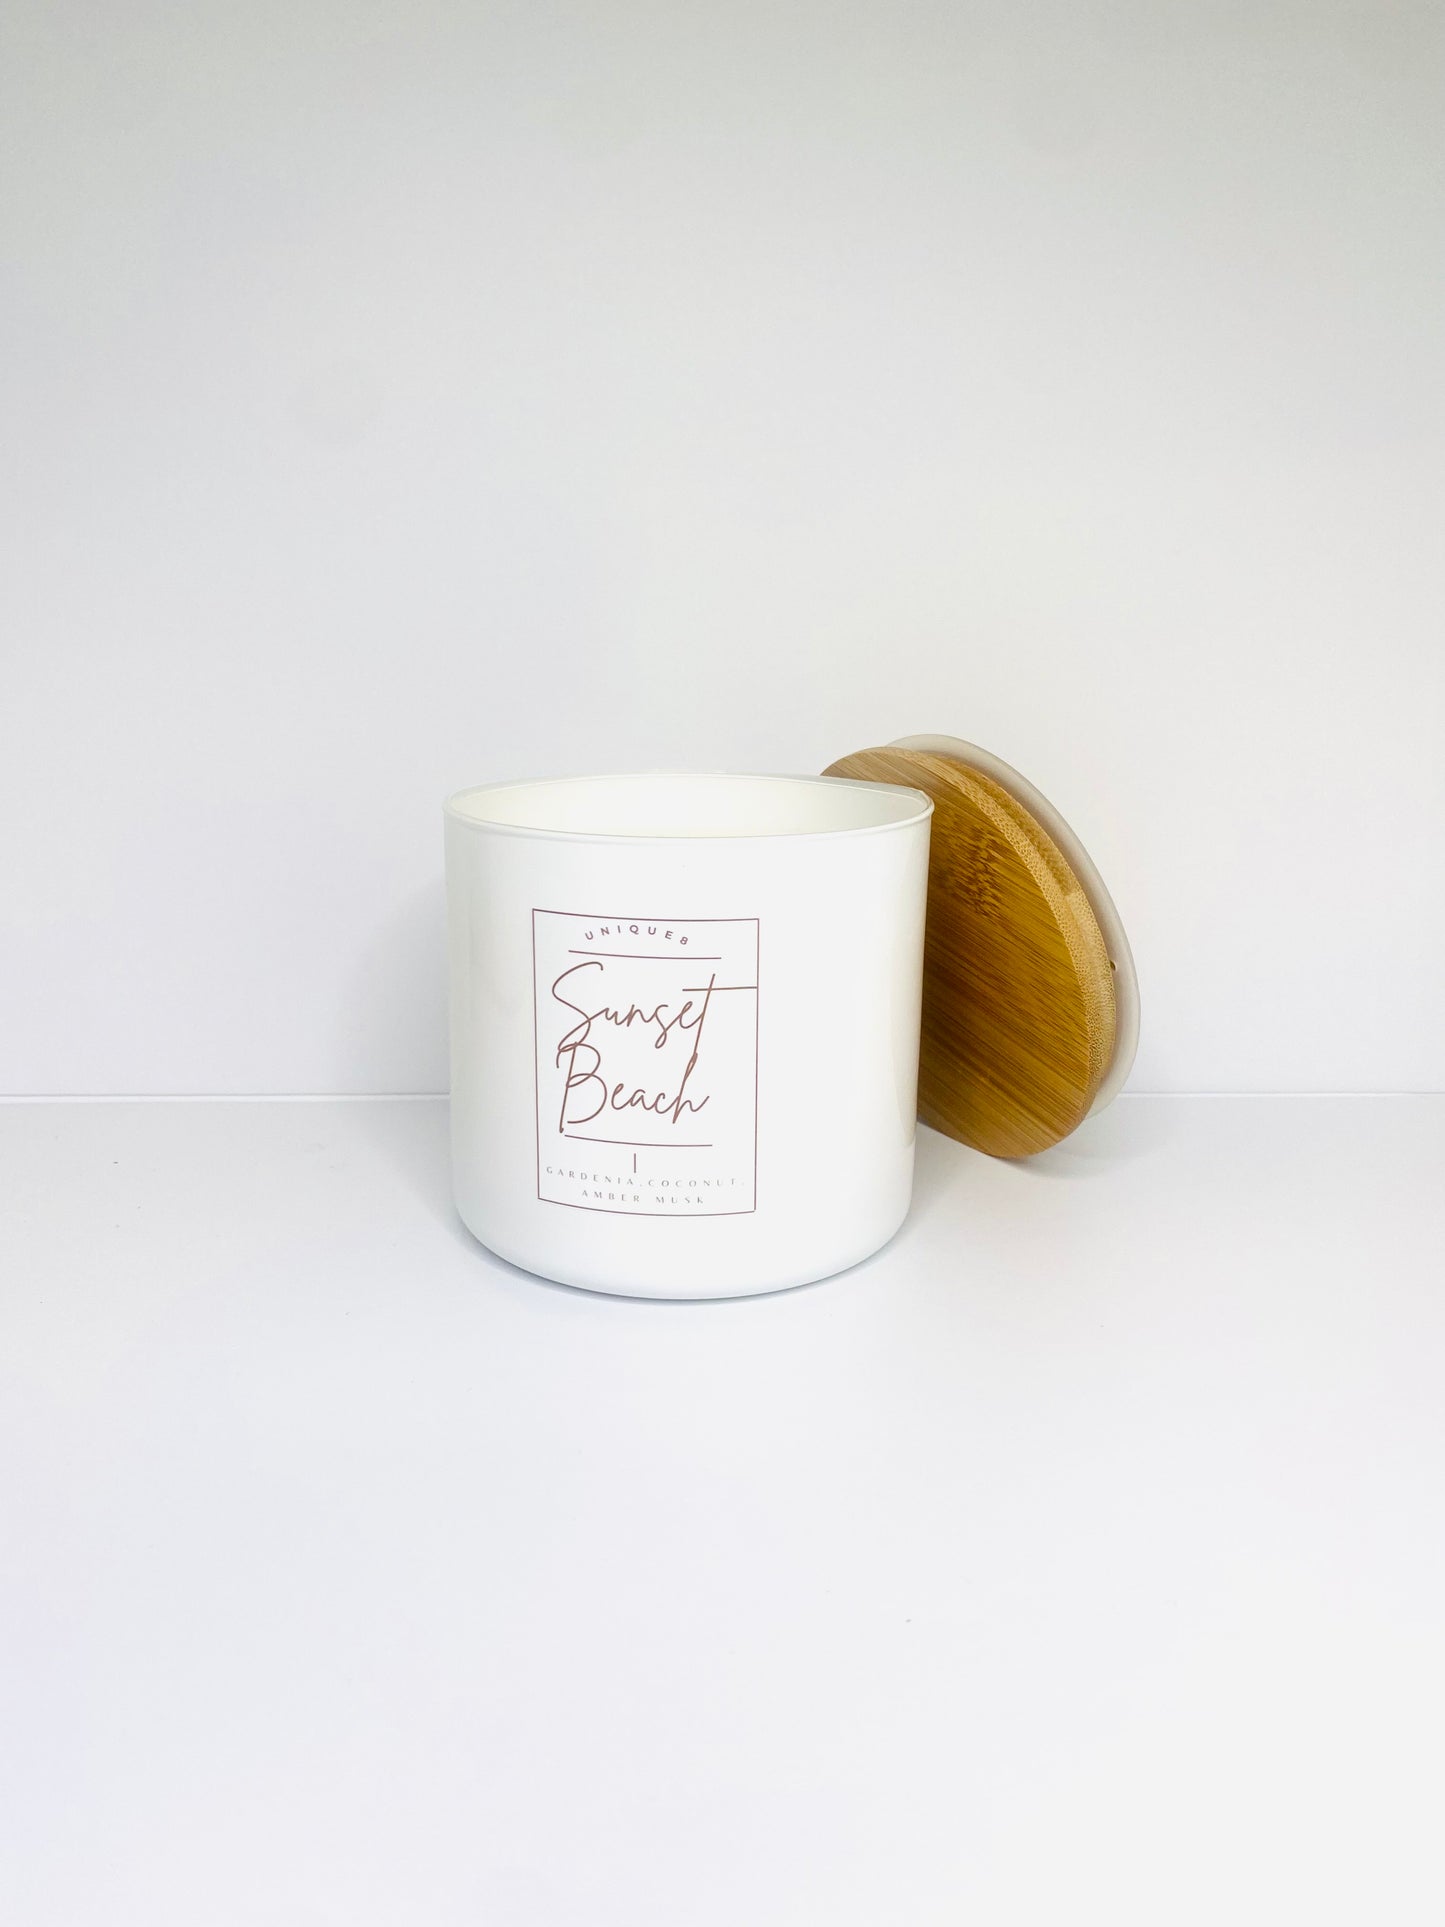 Sunset Beach 16oz Soy Wax Candle